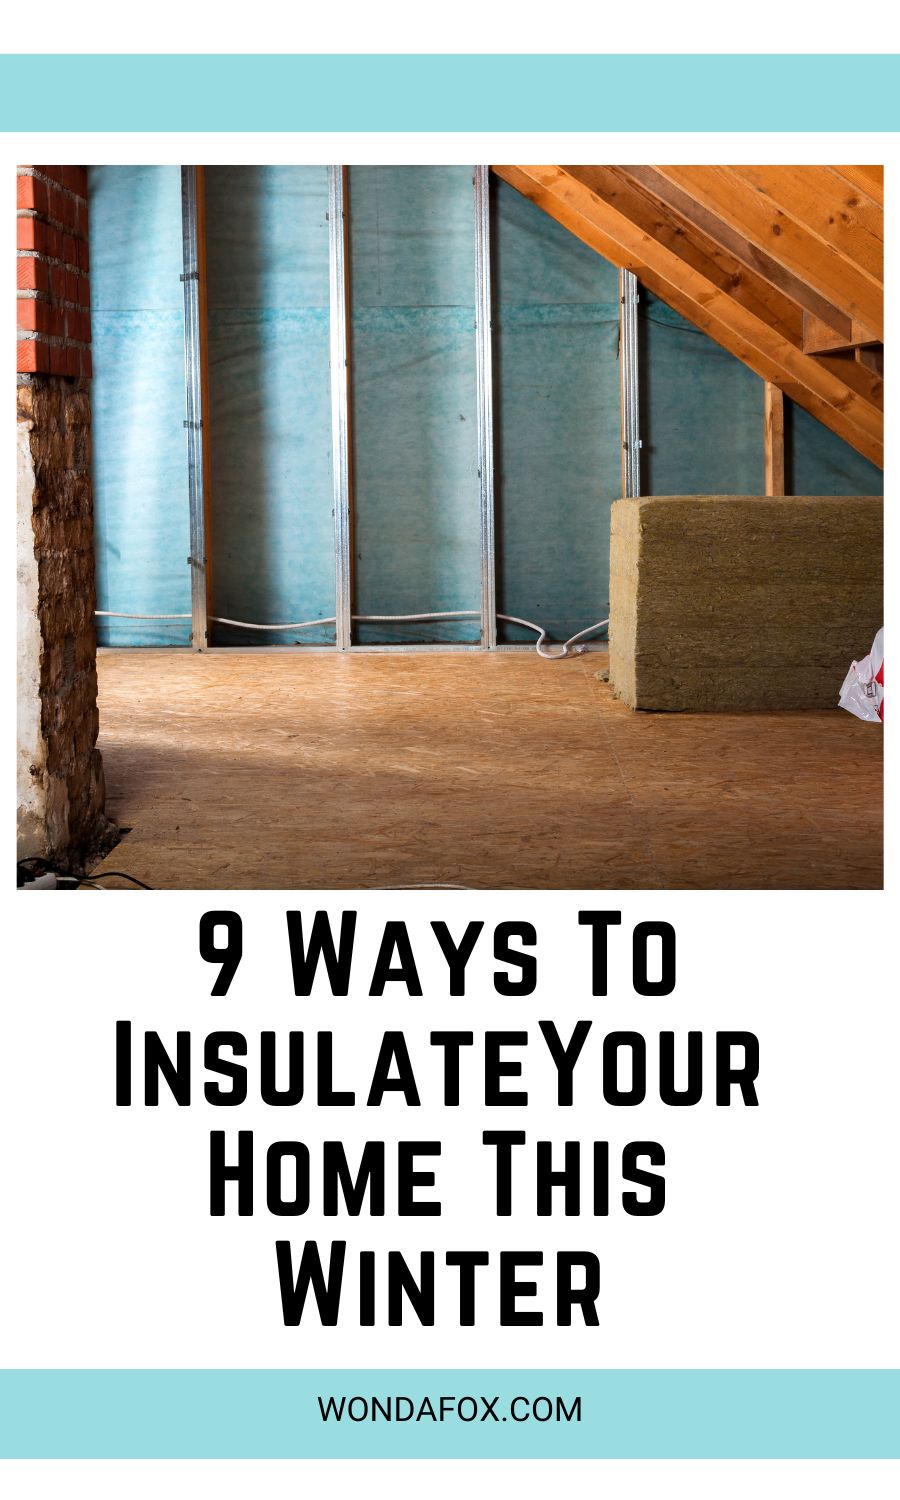 9 Better Ways To Insulate Your Home To Keep It Warm And Cozy This Winter